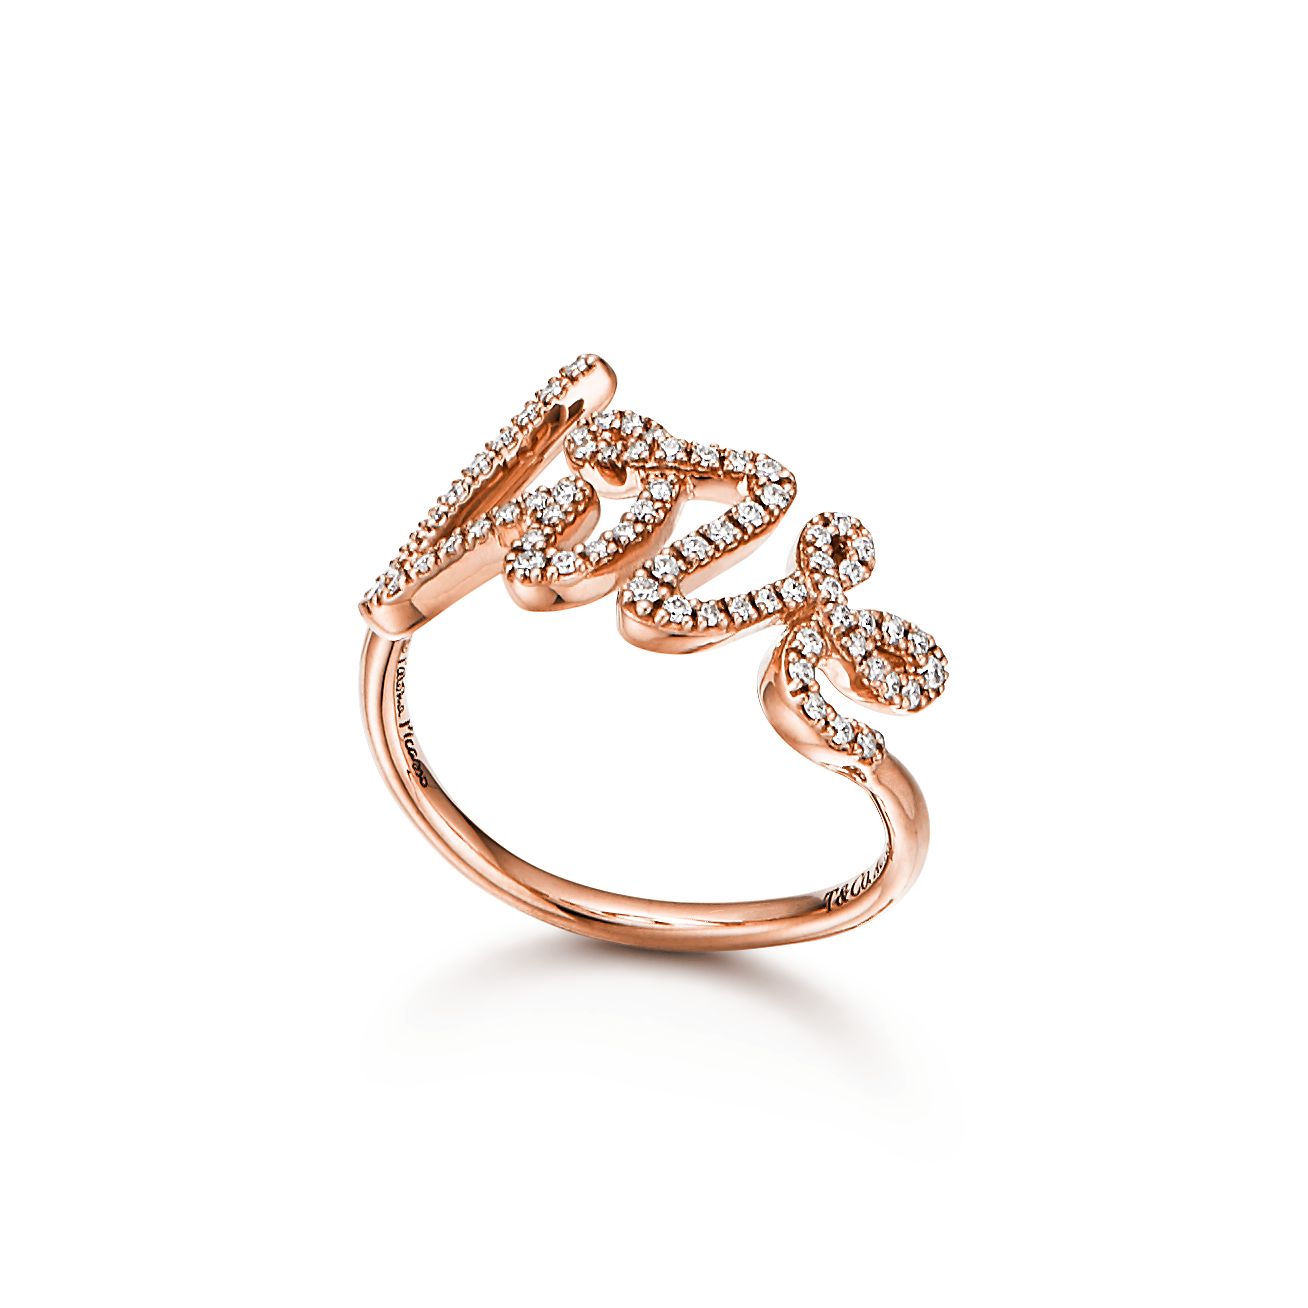 Paloma's Graffiti Love Ring in Rose Gold with Diamonds, Small